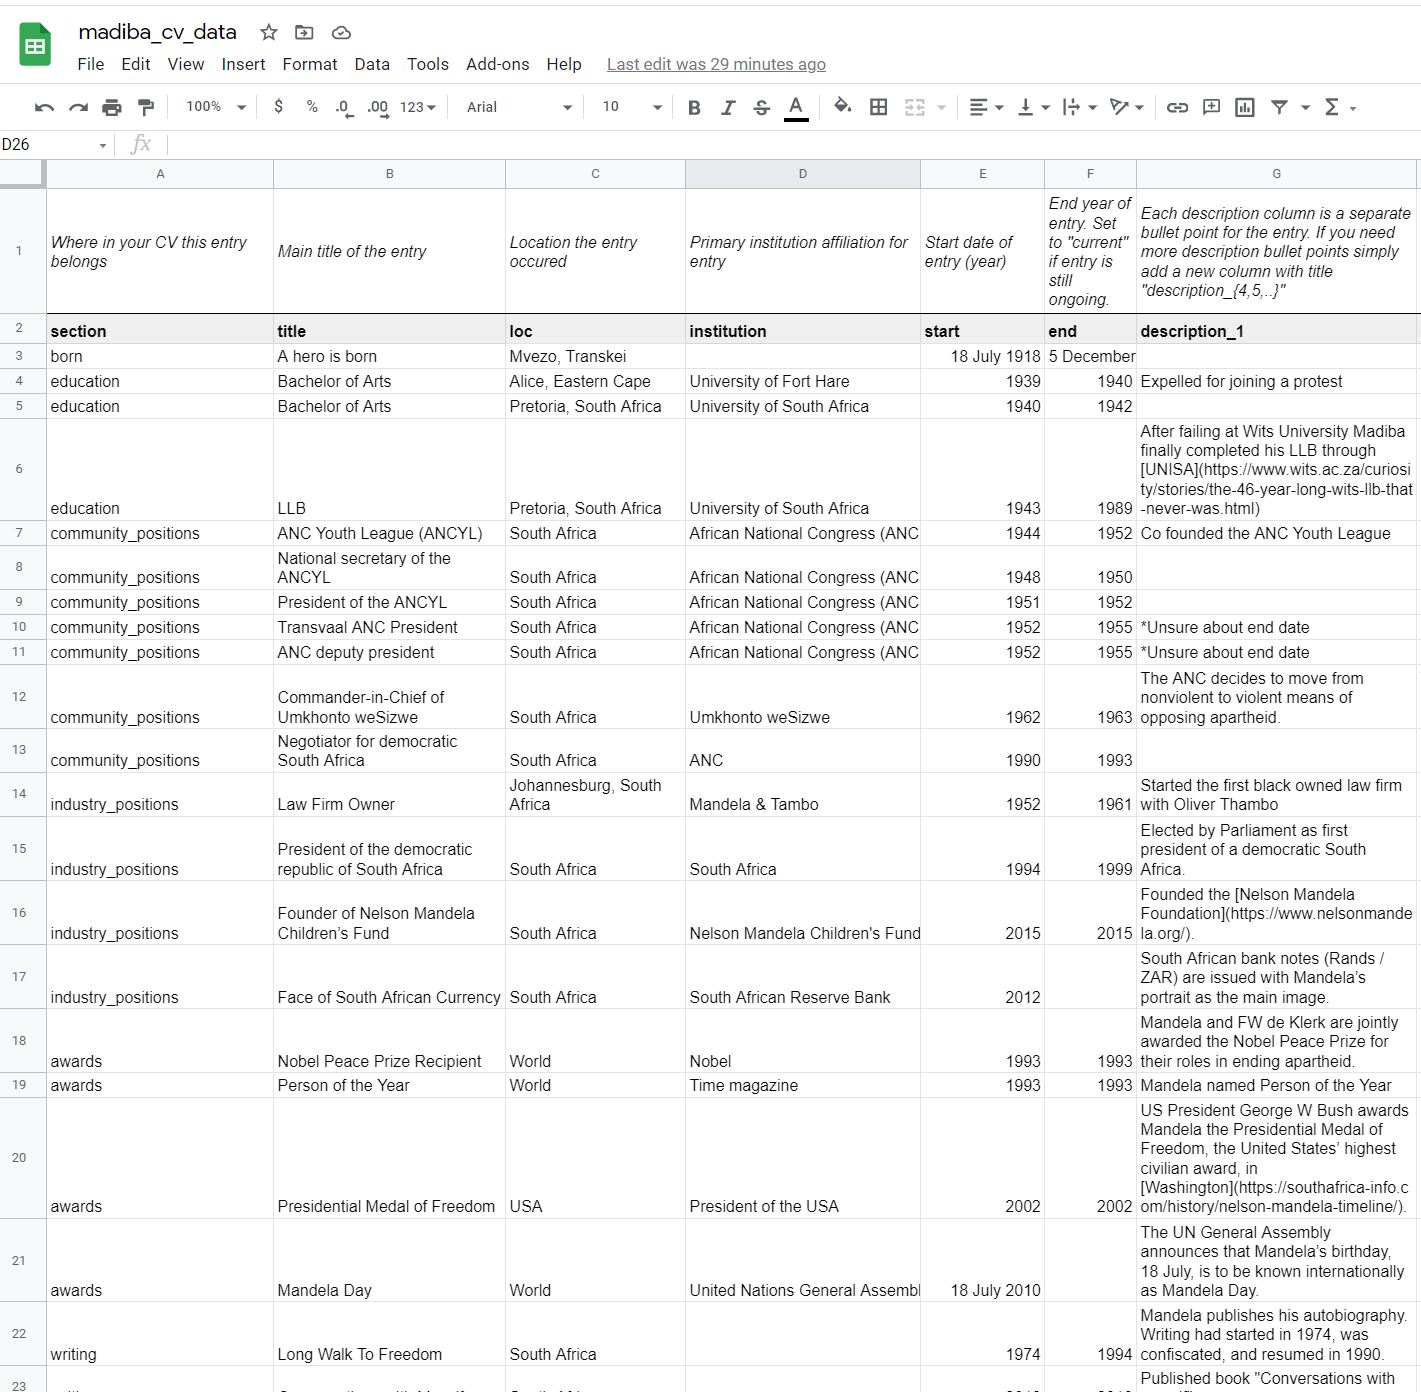 the altered entries sheet of the google sheet is shown with new sections, removed sections and amended sections